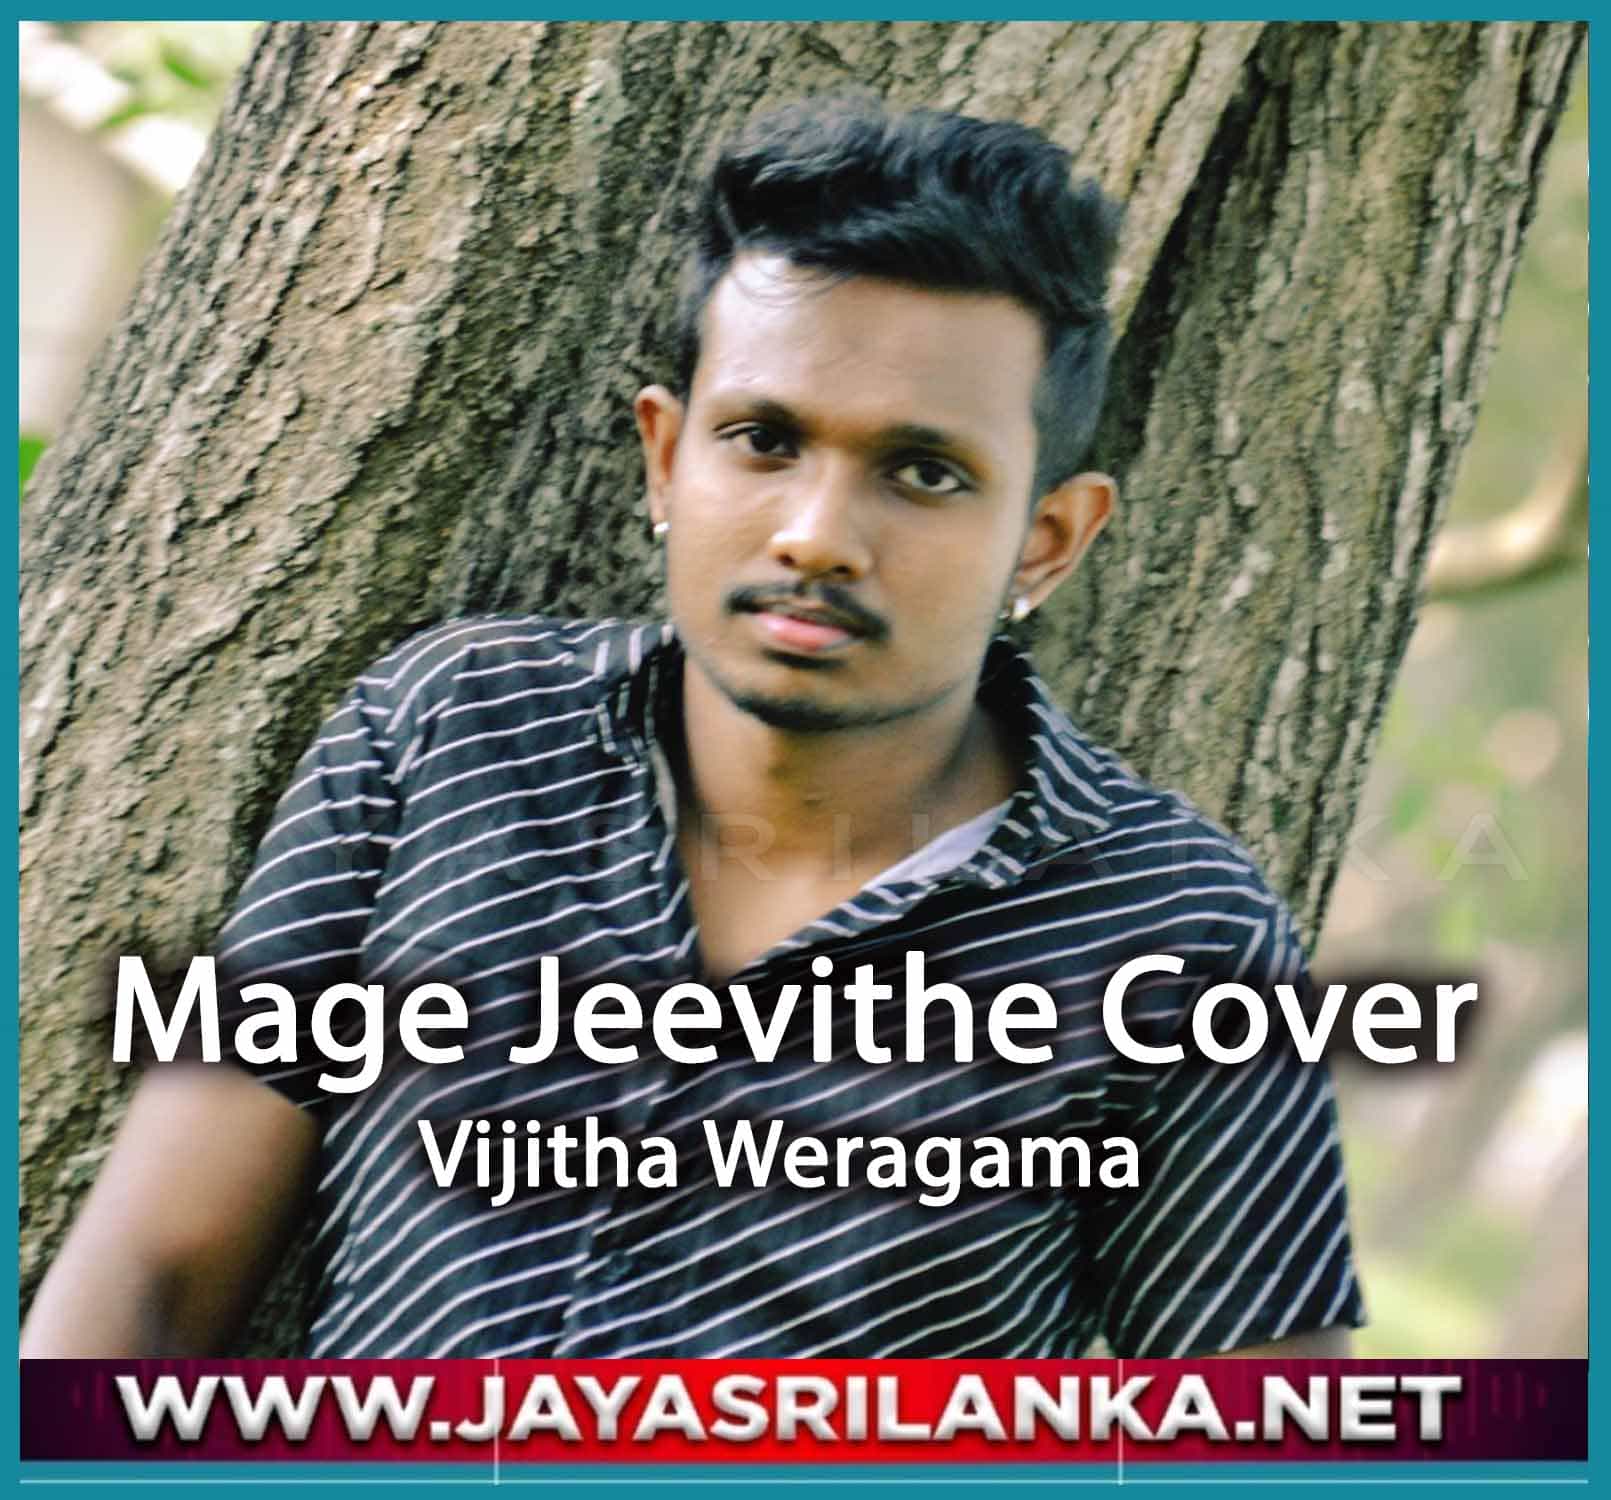 Mage Jeevithe Cover 